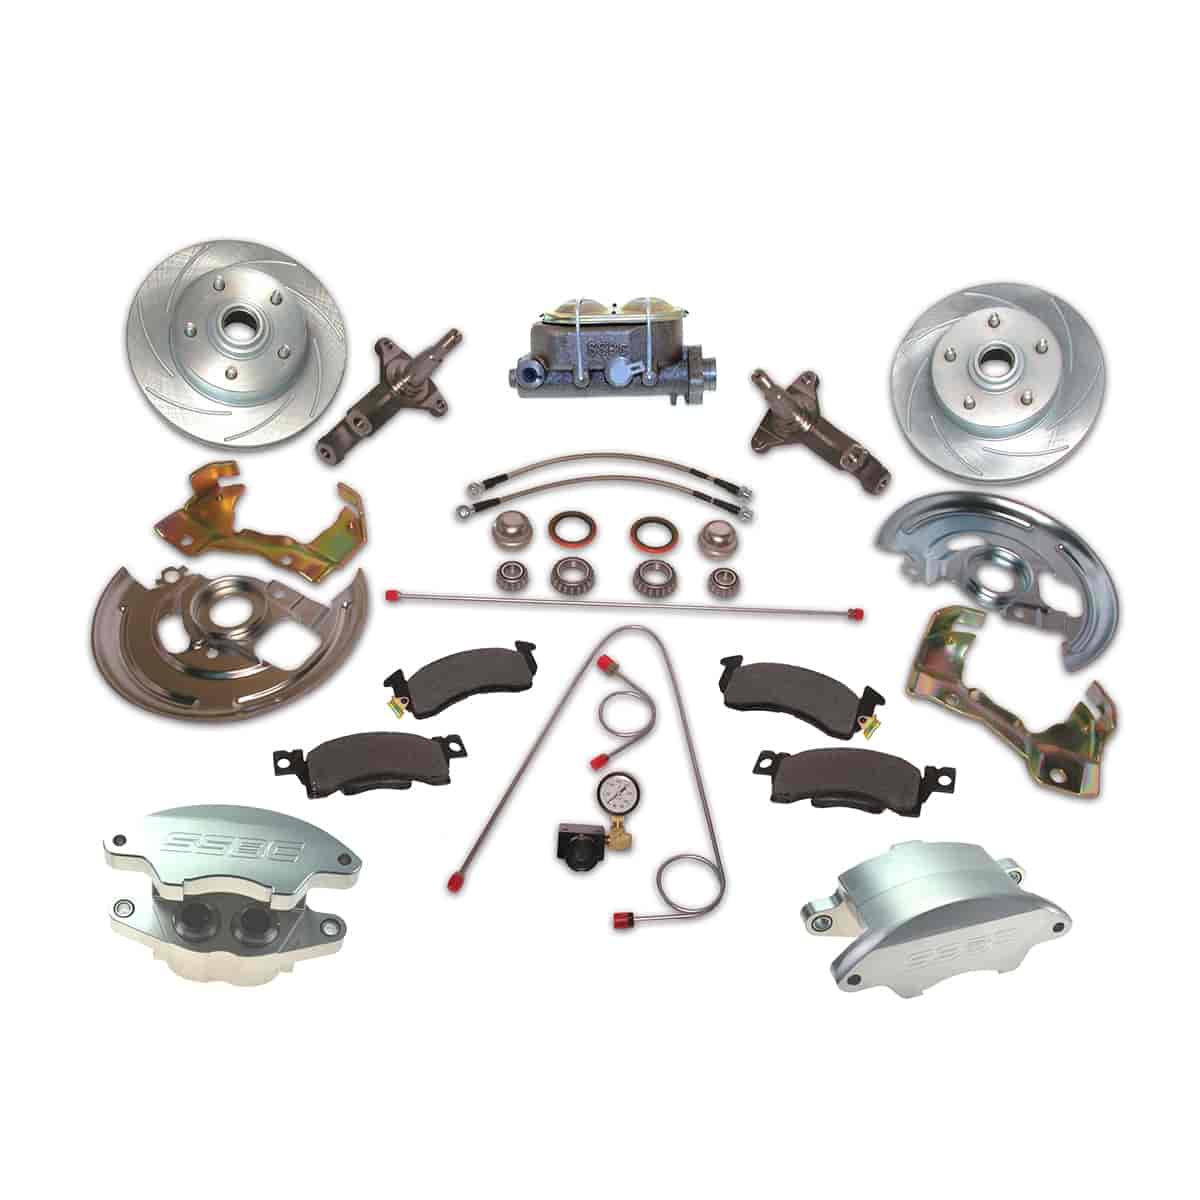 SuperTwin Front Conversion Kit Early GM, See Details for Applications